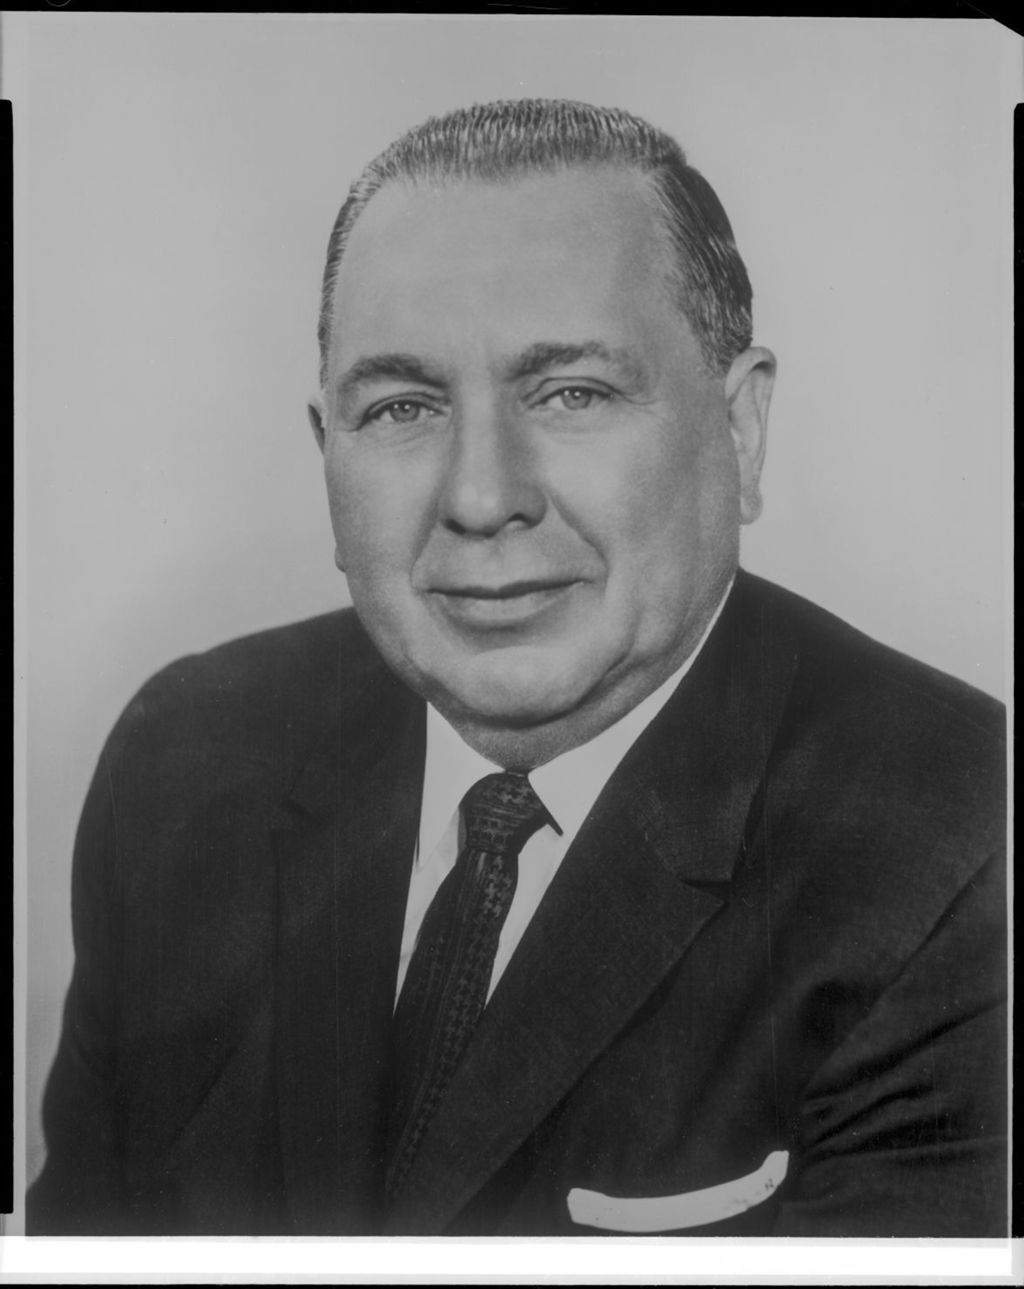 Richard J. Daley in suit and tie